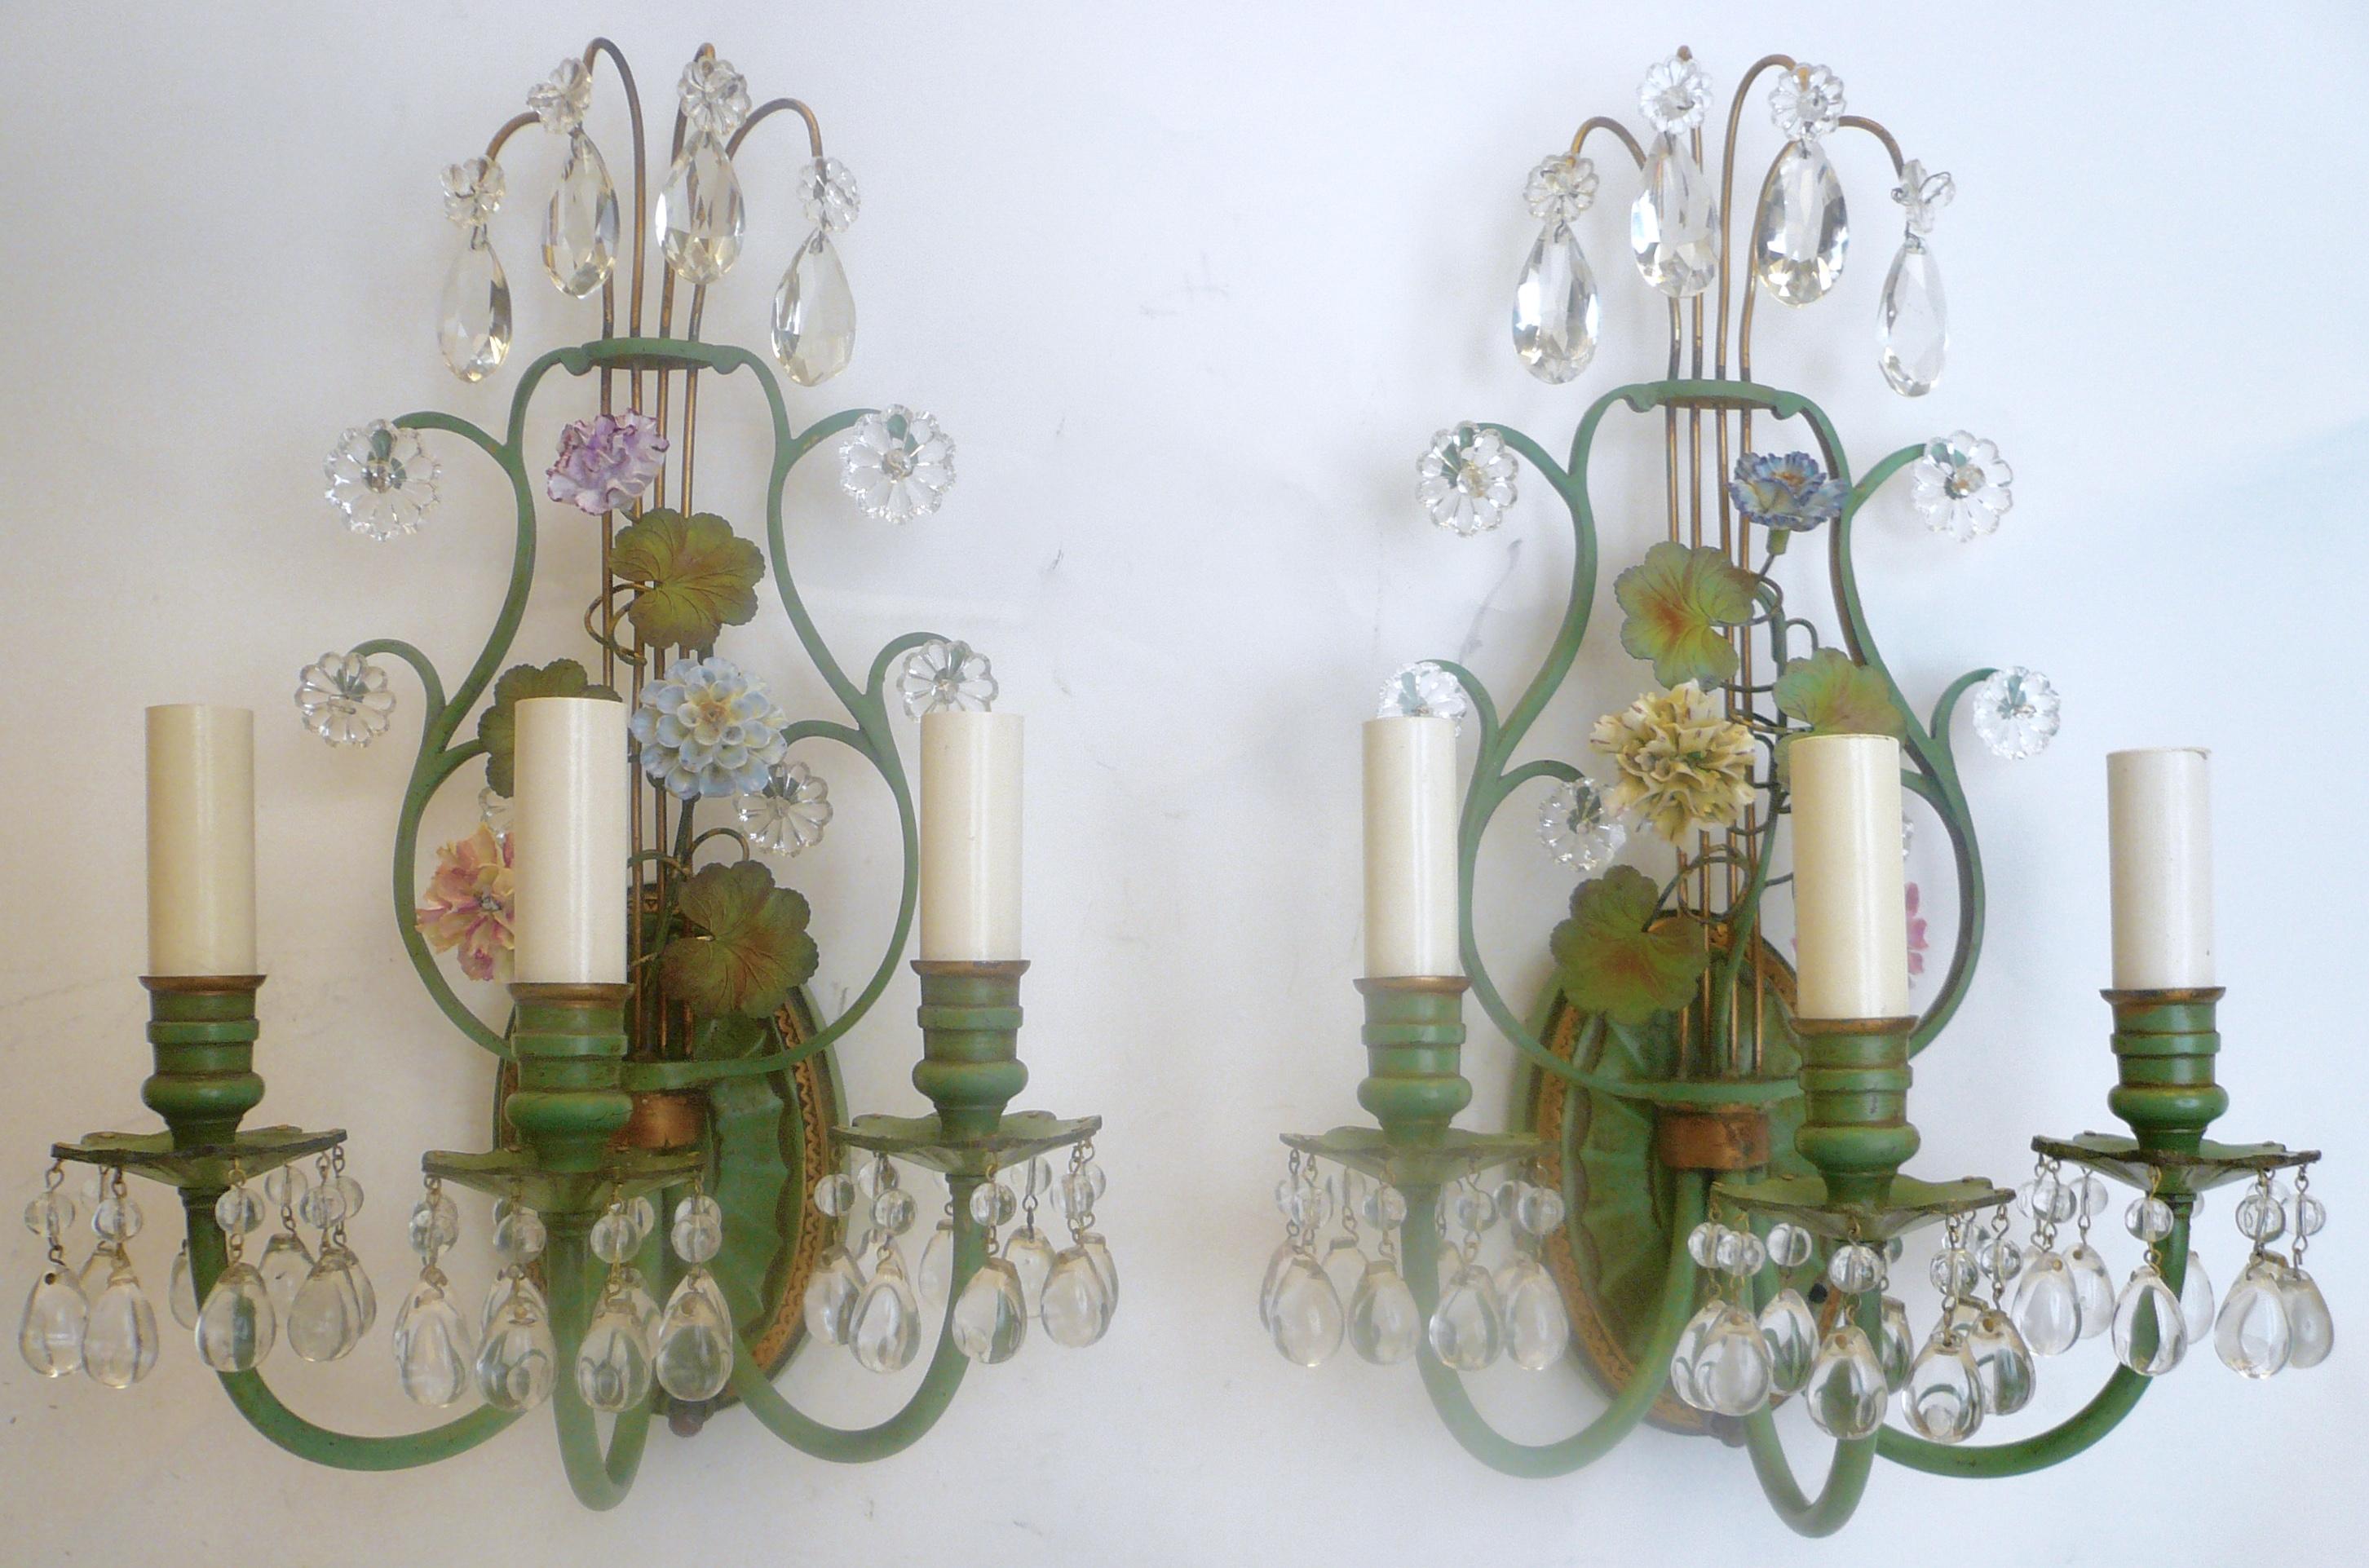 These neoclassical lyre back sconces are in the Louis XVI style, and feature hand painted porcelain flowers. They are made of enameled bronze with gilt highlights, and are hung with crystal drops. These sconces were purchased from the estate of Drue